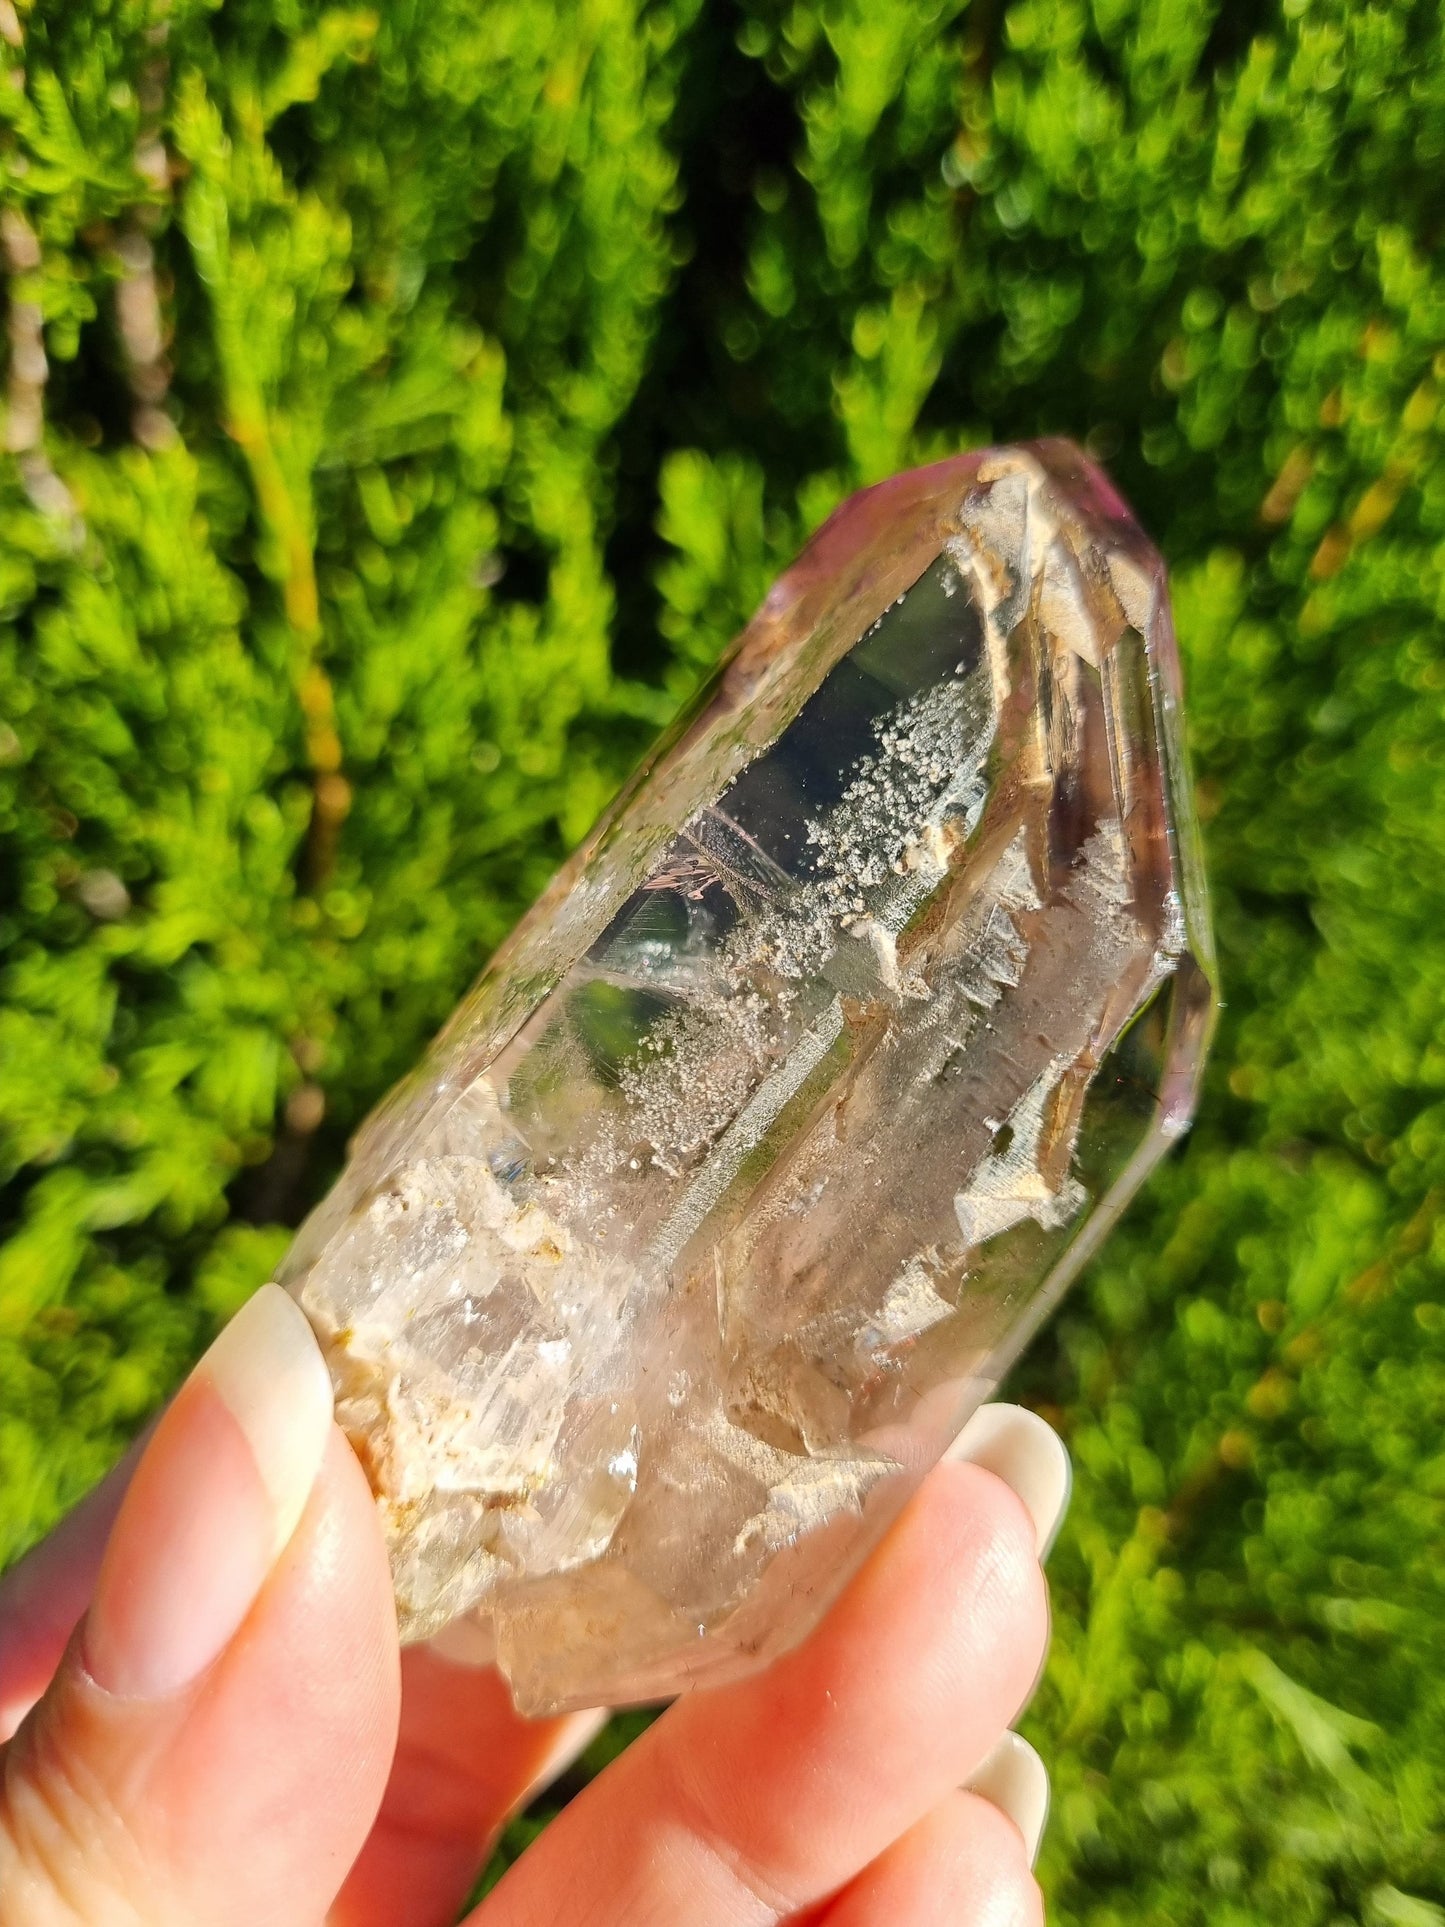 Smoky manifest enhydro with amethyst inclusions